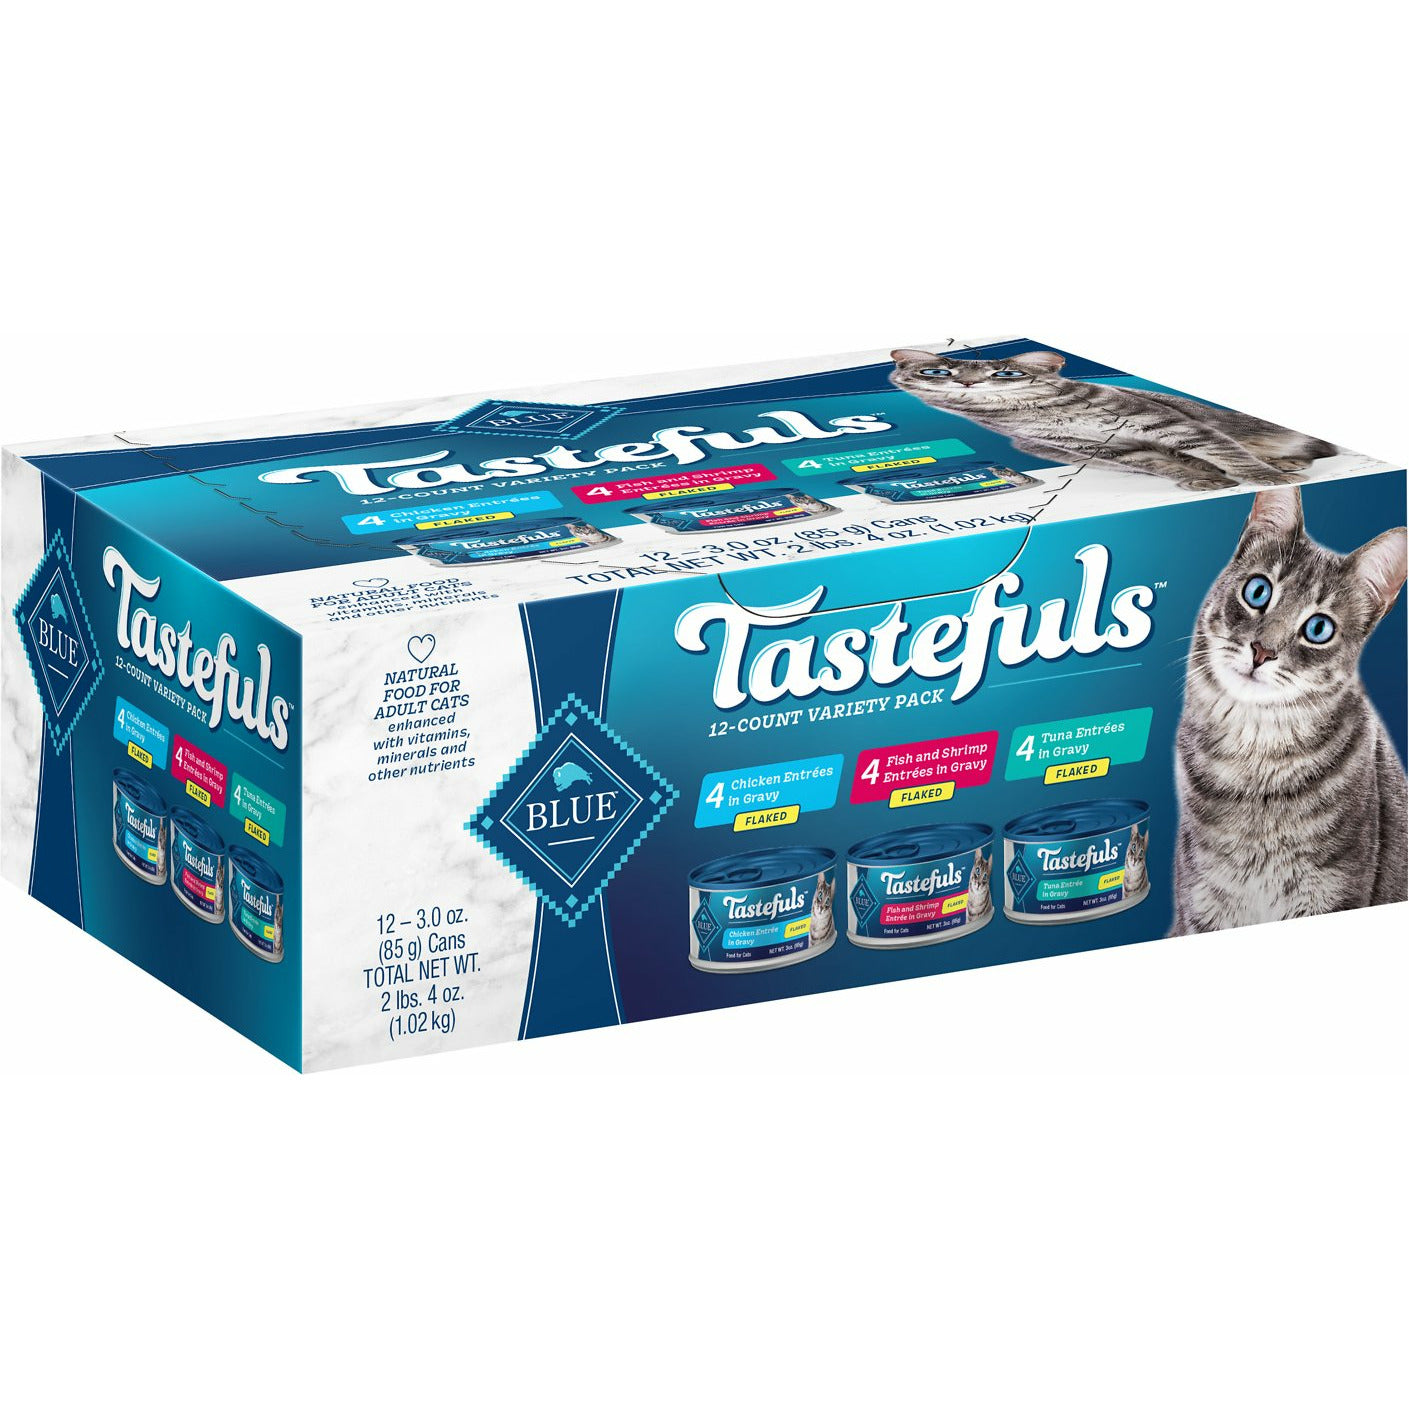 Blue Buffalo Tastefuls Tuna, Chicken, Fish & Shrimp Entrées Variety Pack Flaked Wet Cat Food  Canned Cat Food  | PetMax Canada